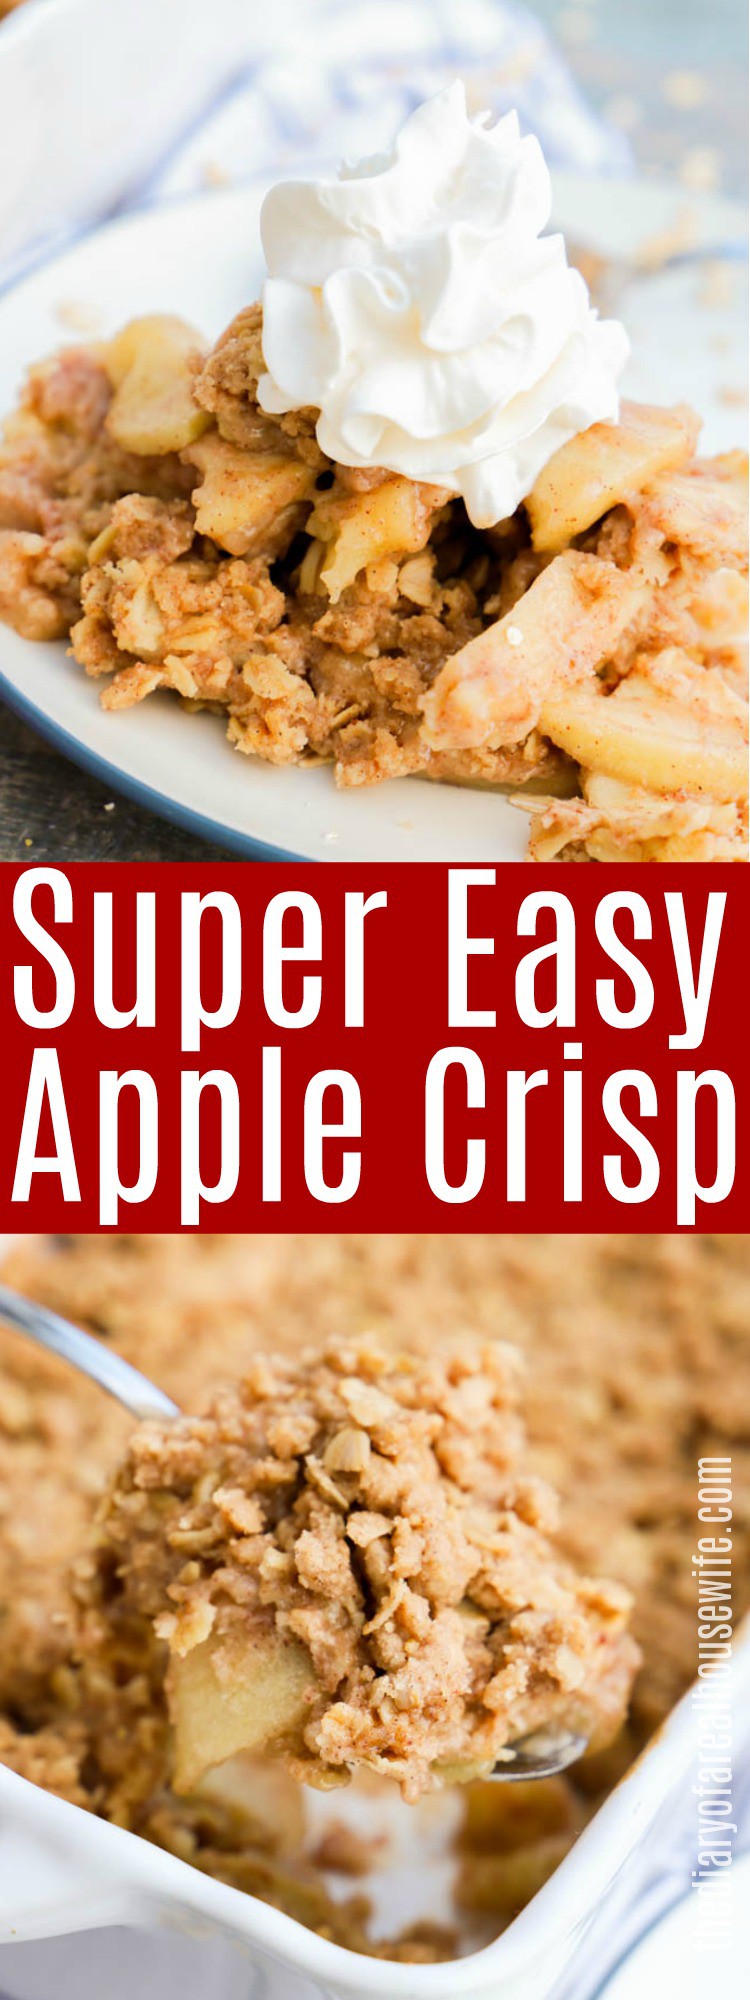 Easy Apple Crisp • The Diary of a Real Housewife